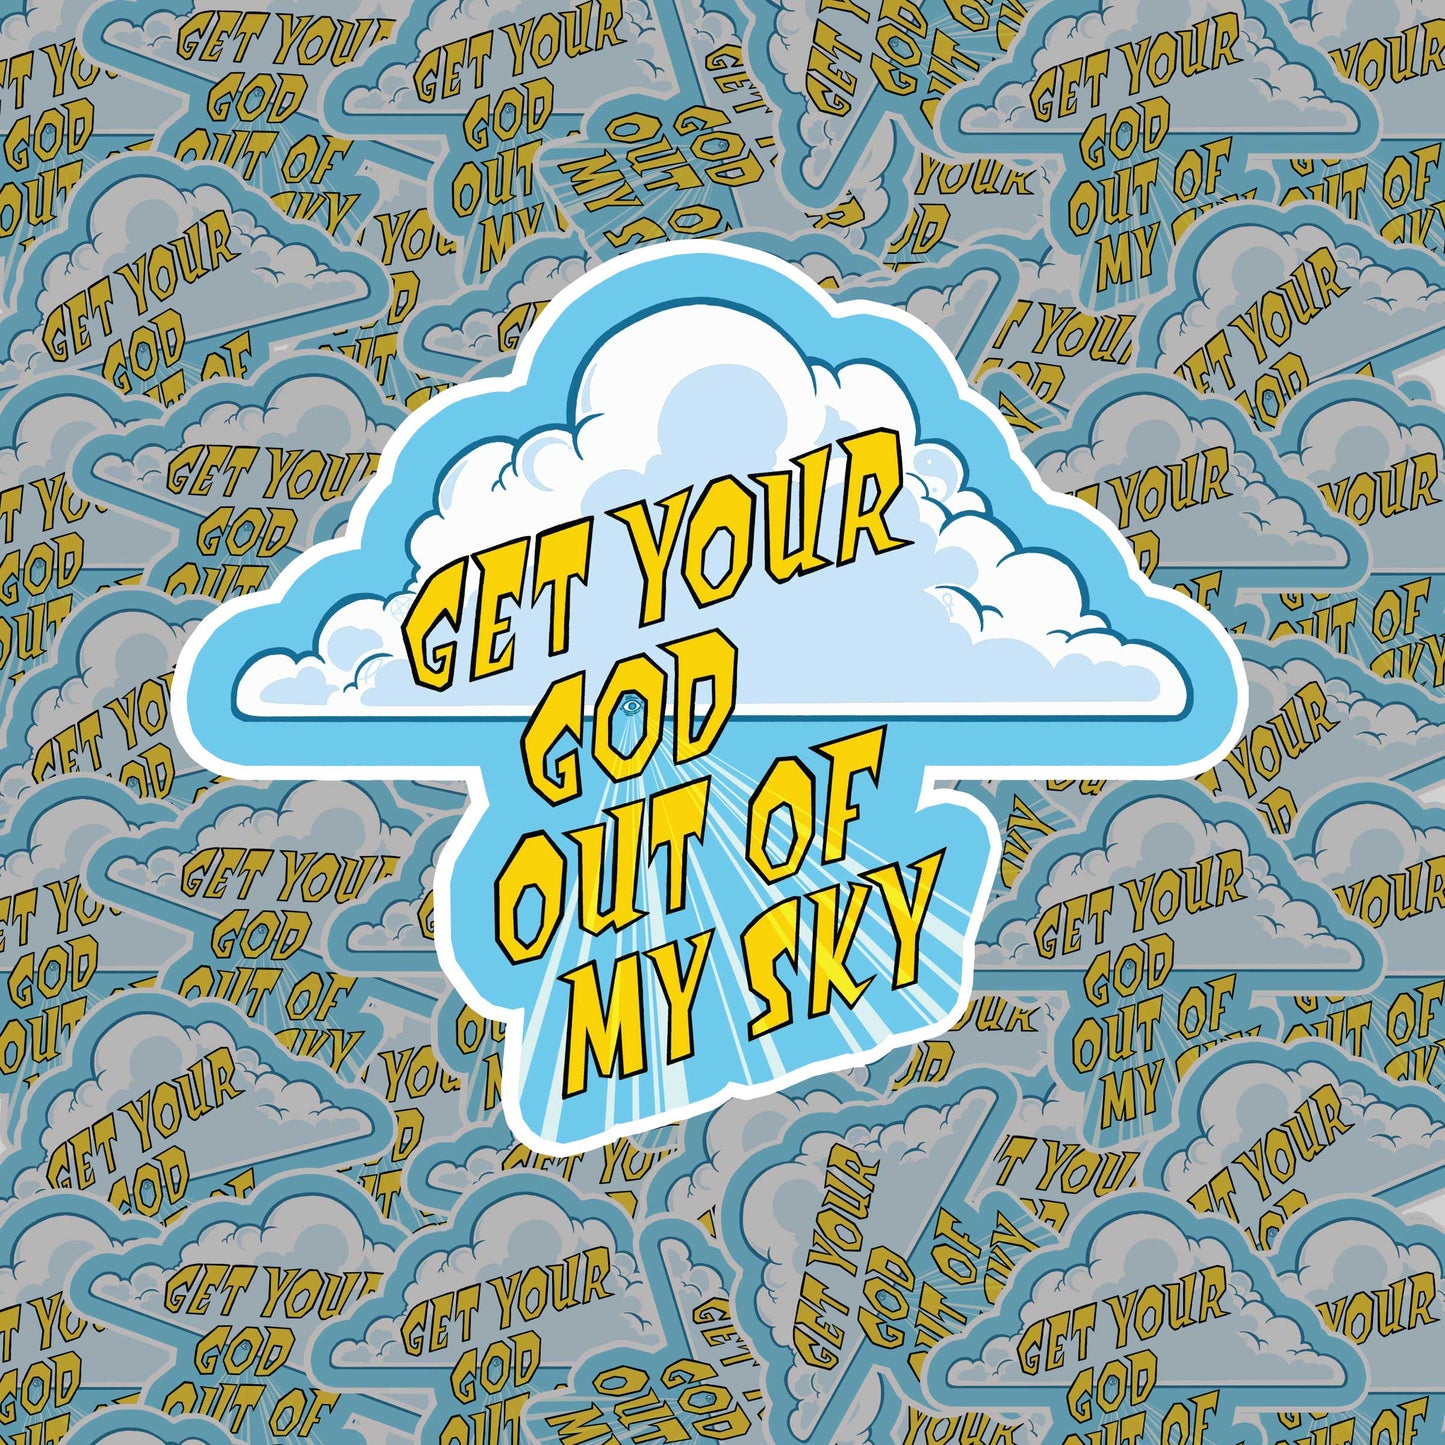 Get your god out of my sky with cloud design on a white vinyl water proof sticker